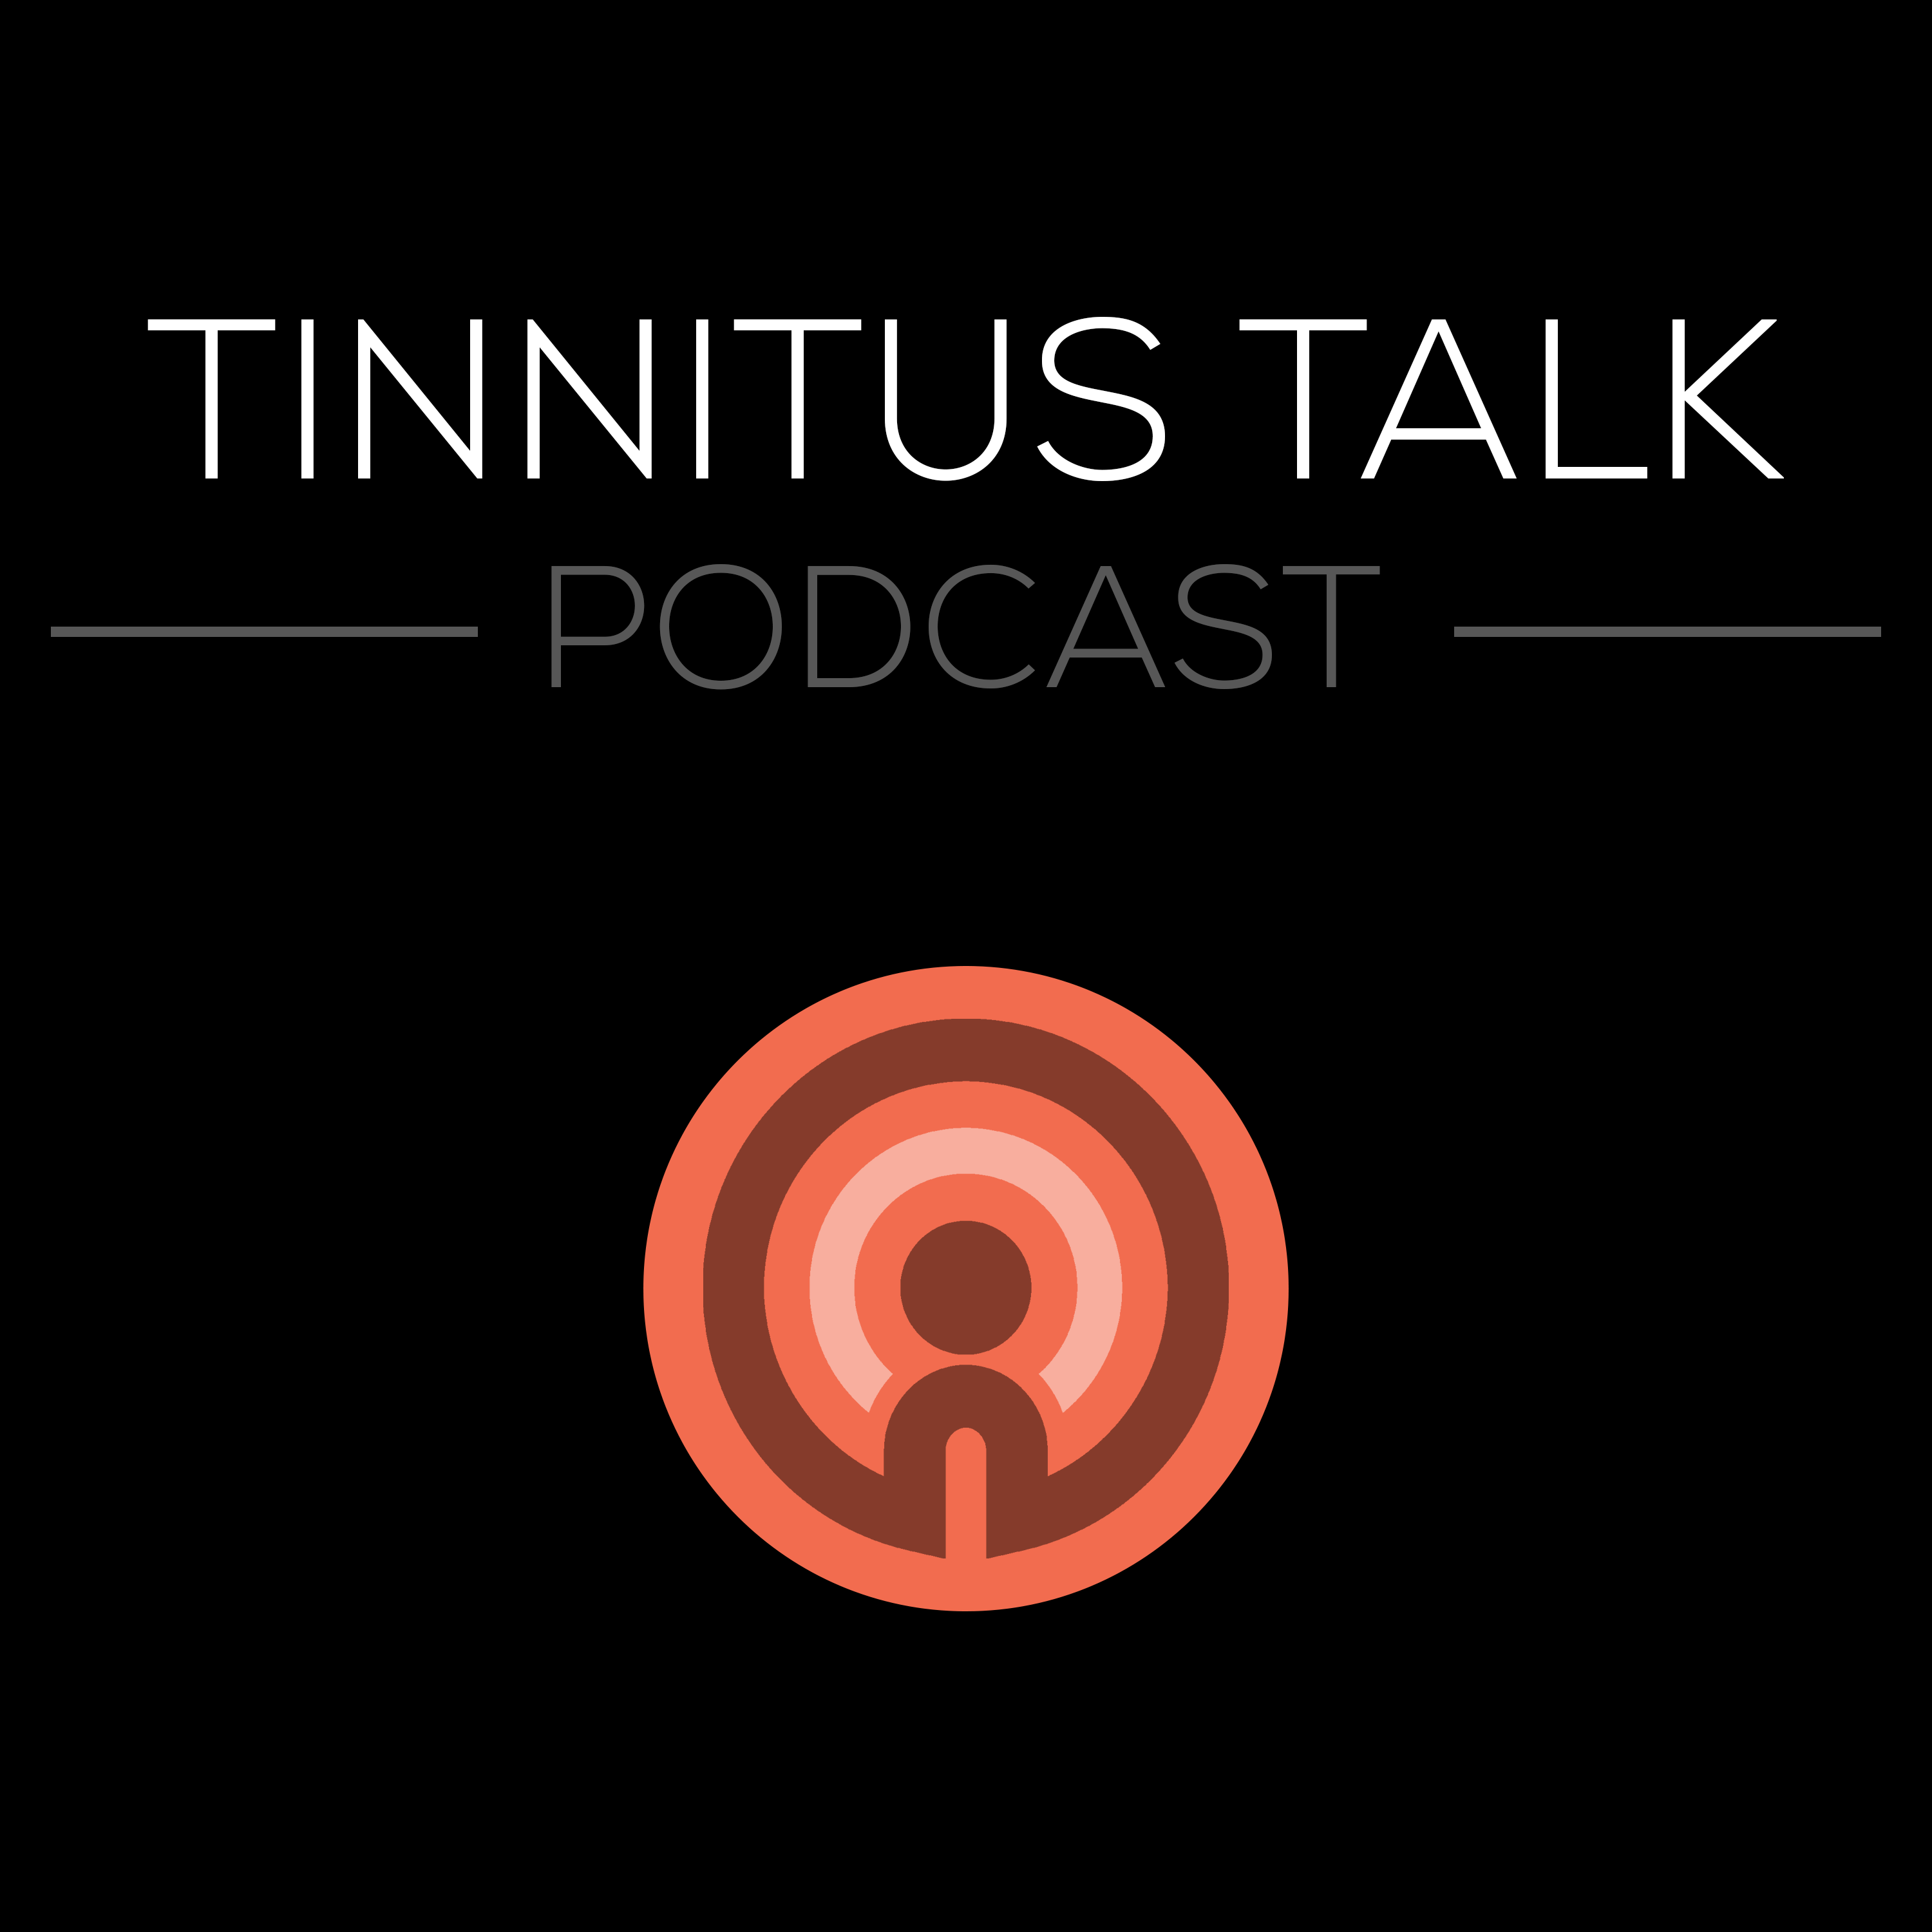 Tinnitus and the Power of Prediction - Dr. Will Sedley